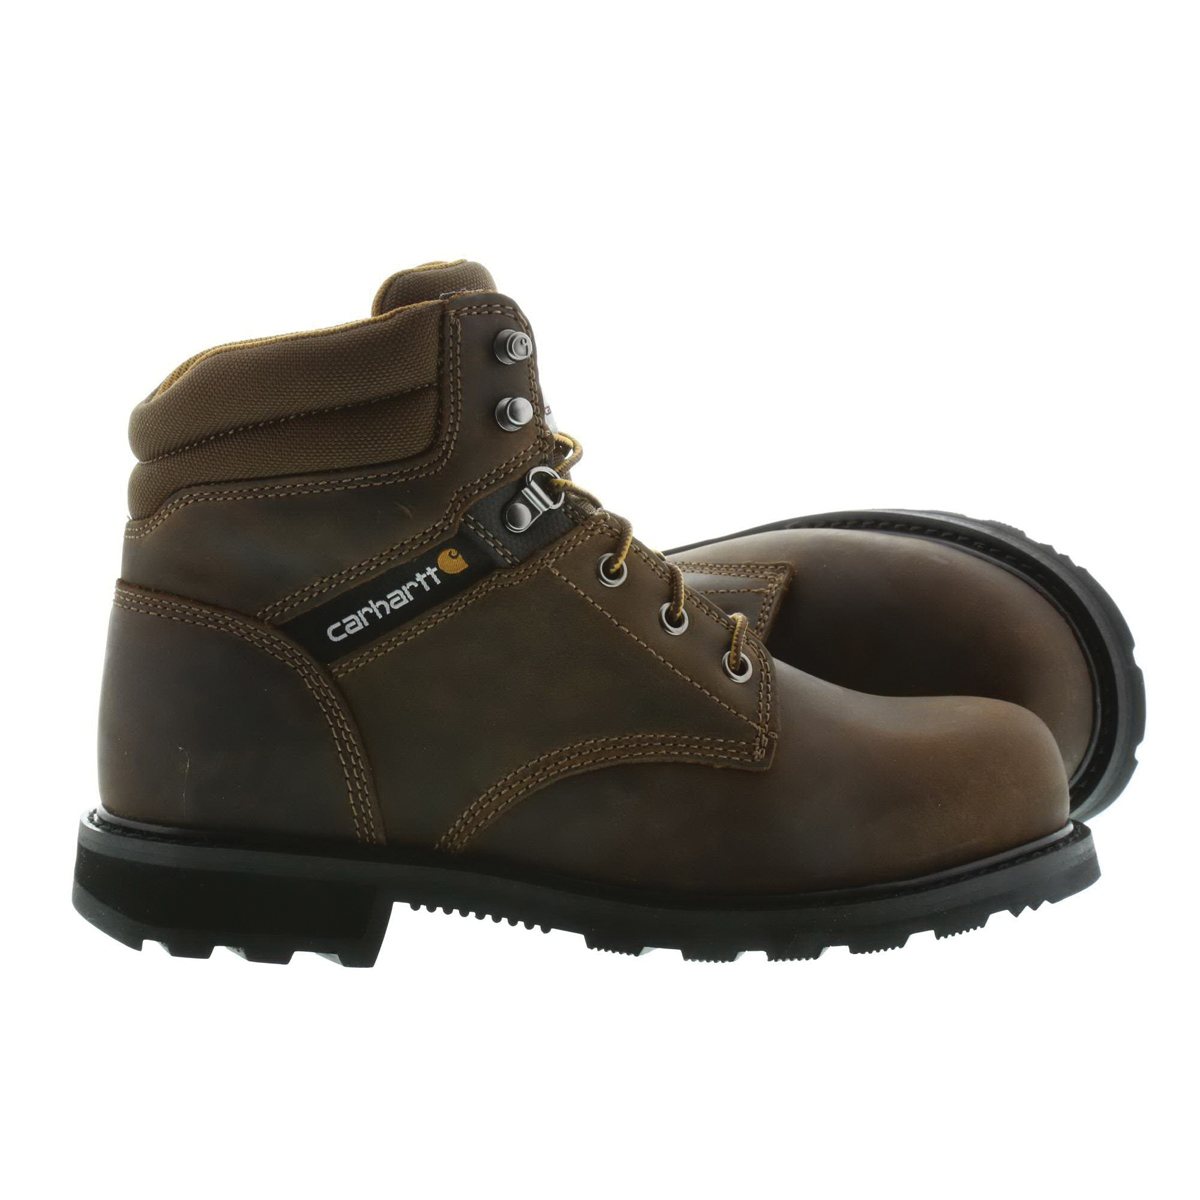 Carhartt CMW6174-12M Work Boots, 12, M W, Dark Brown Oil Tanned, Leather Upper, Lace-Up Closure - 3